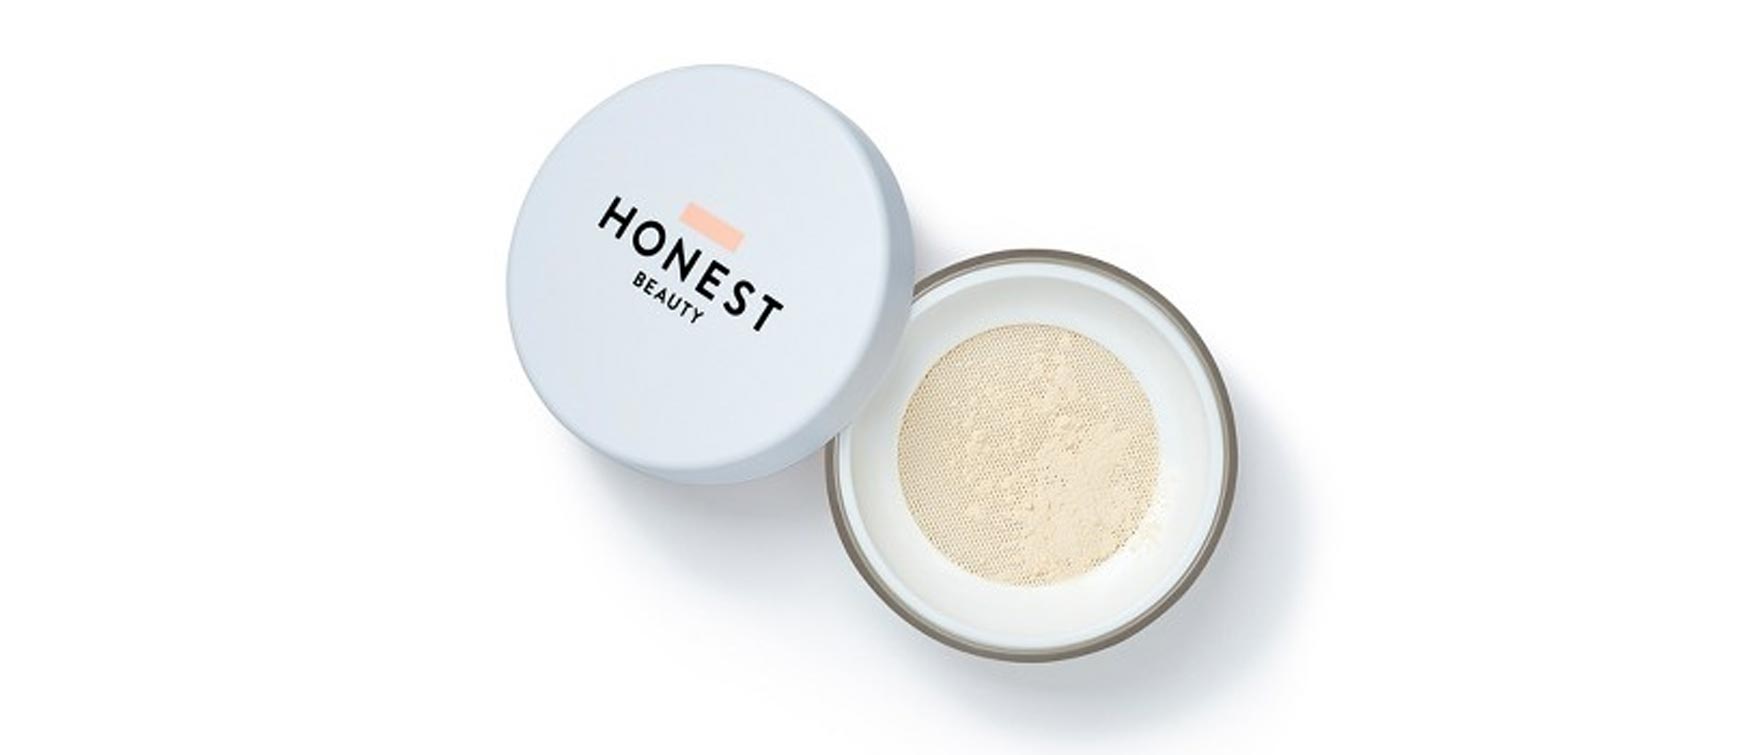 5. Honest beauty invisible blurring loose powder